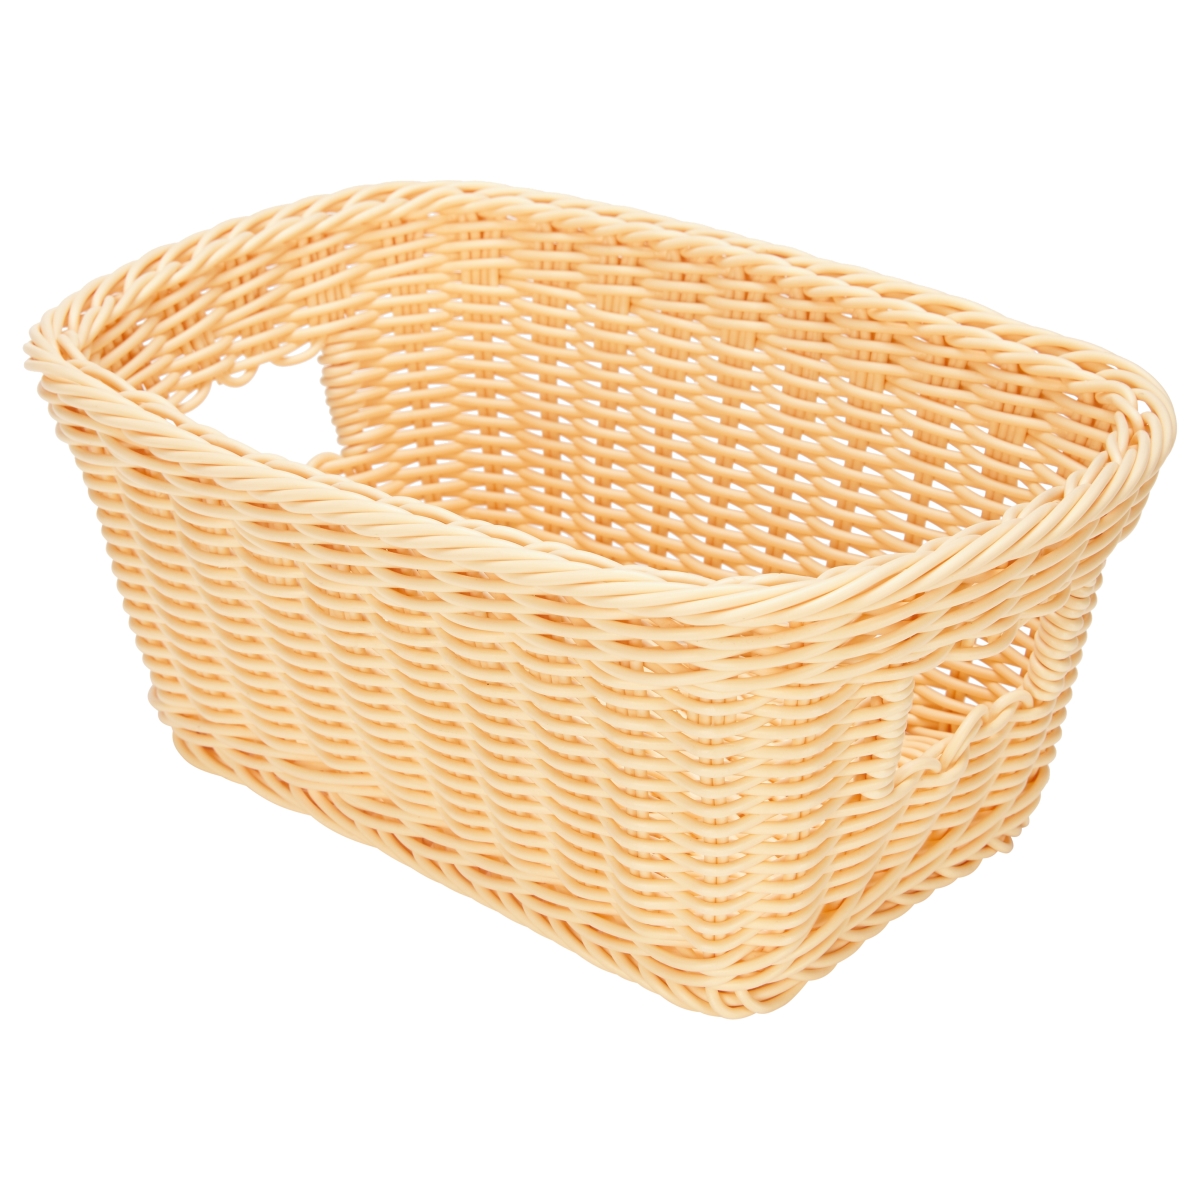 Elr-0492 11 X 8 X 5 In. Woven Plastic Basket With Handle Small Case - Pack Of 24